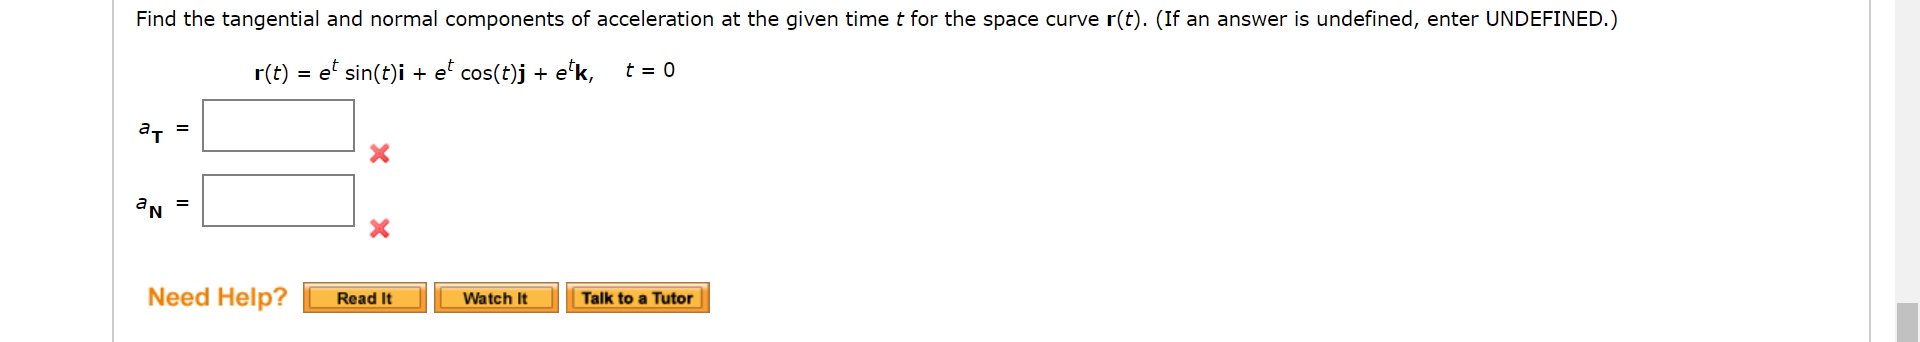 Find the tangential and normal components of acceleration at the given time t for the space curve r(t). (If an answer is undefined, enter UNDEFINED.)
r(t) = e' sin(t)i + e' cos(t)j + e'k,
t = 0
ат
%3D
